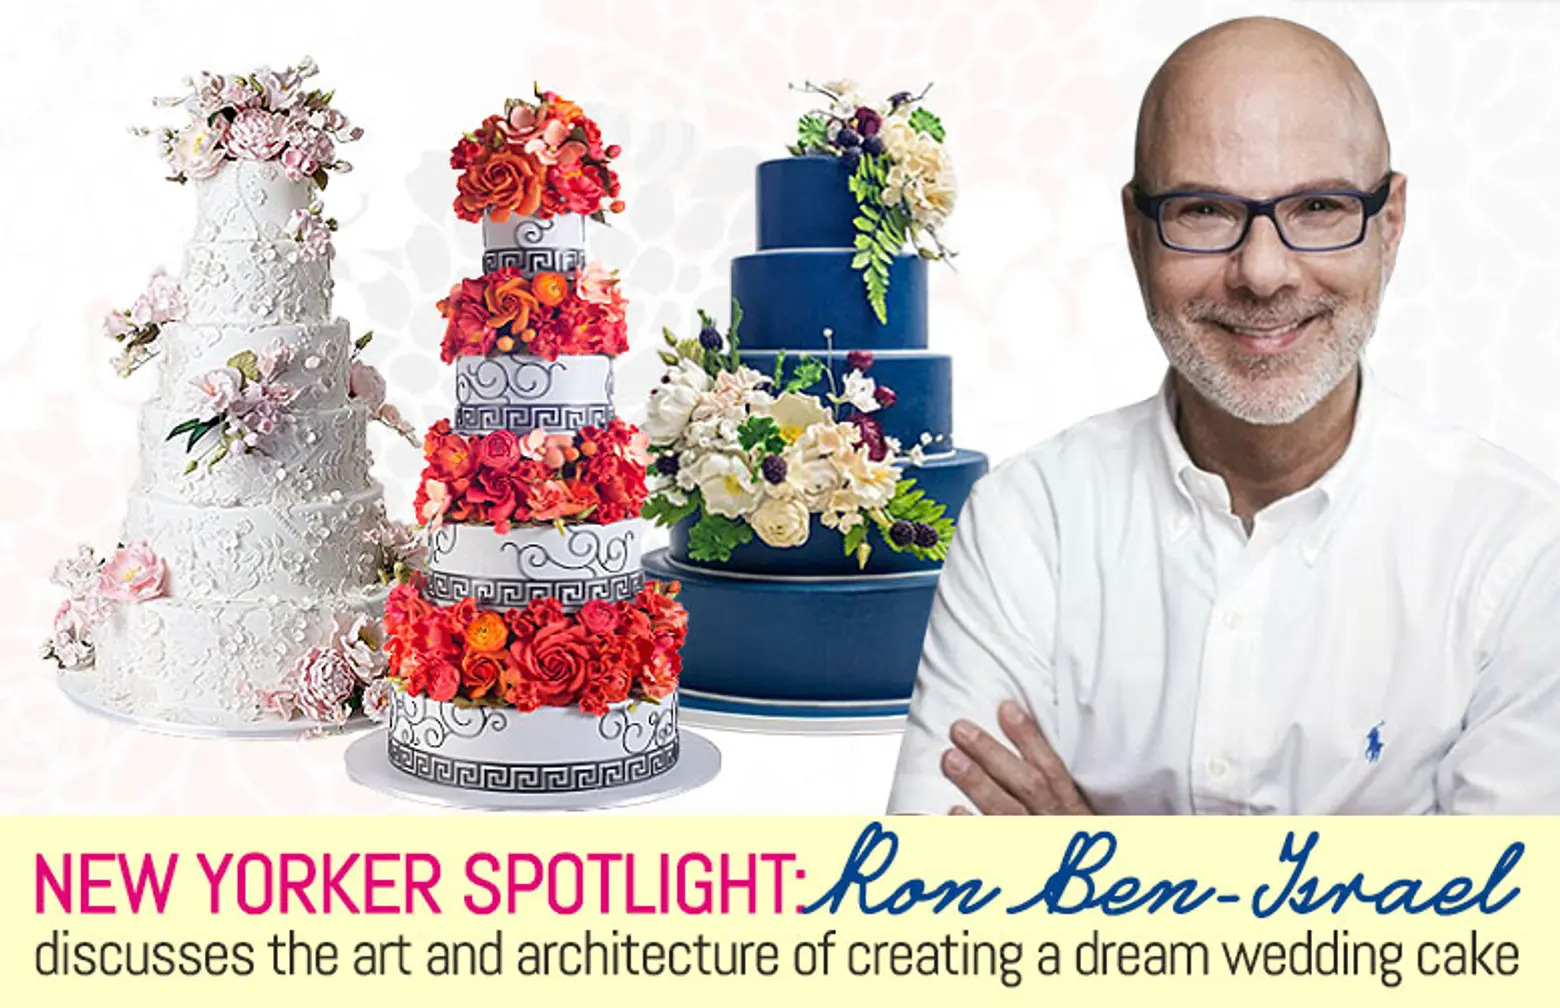 Spotlight: Ron Ben-Israel on the Art and Architecture of Creating a Wedding Cake